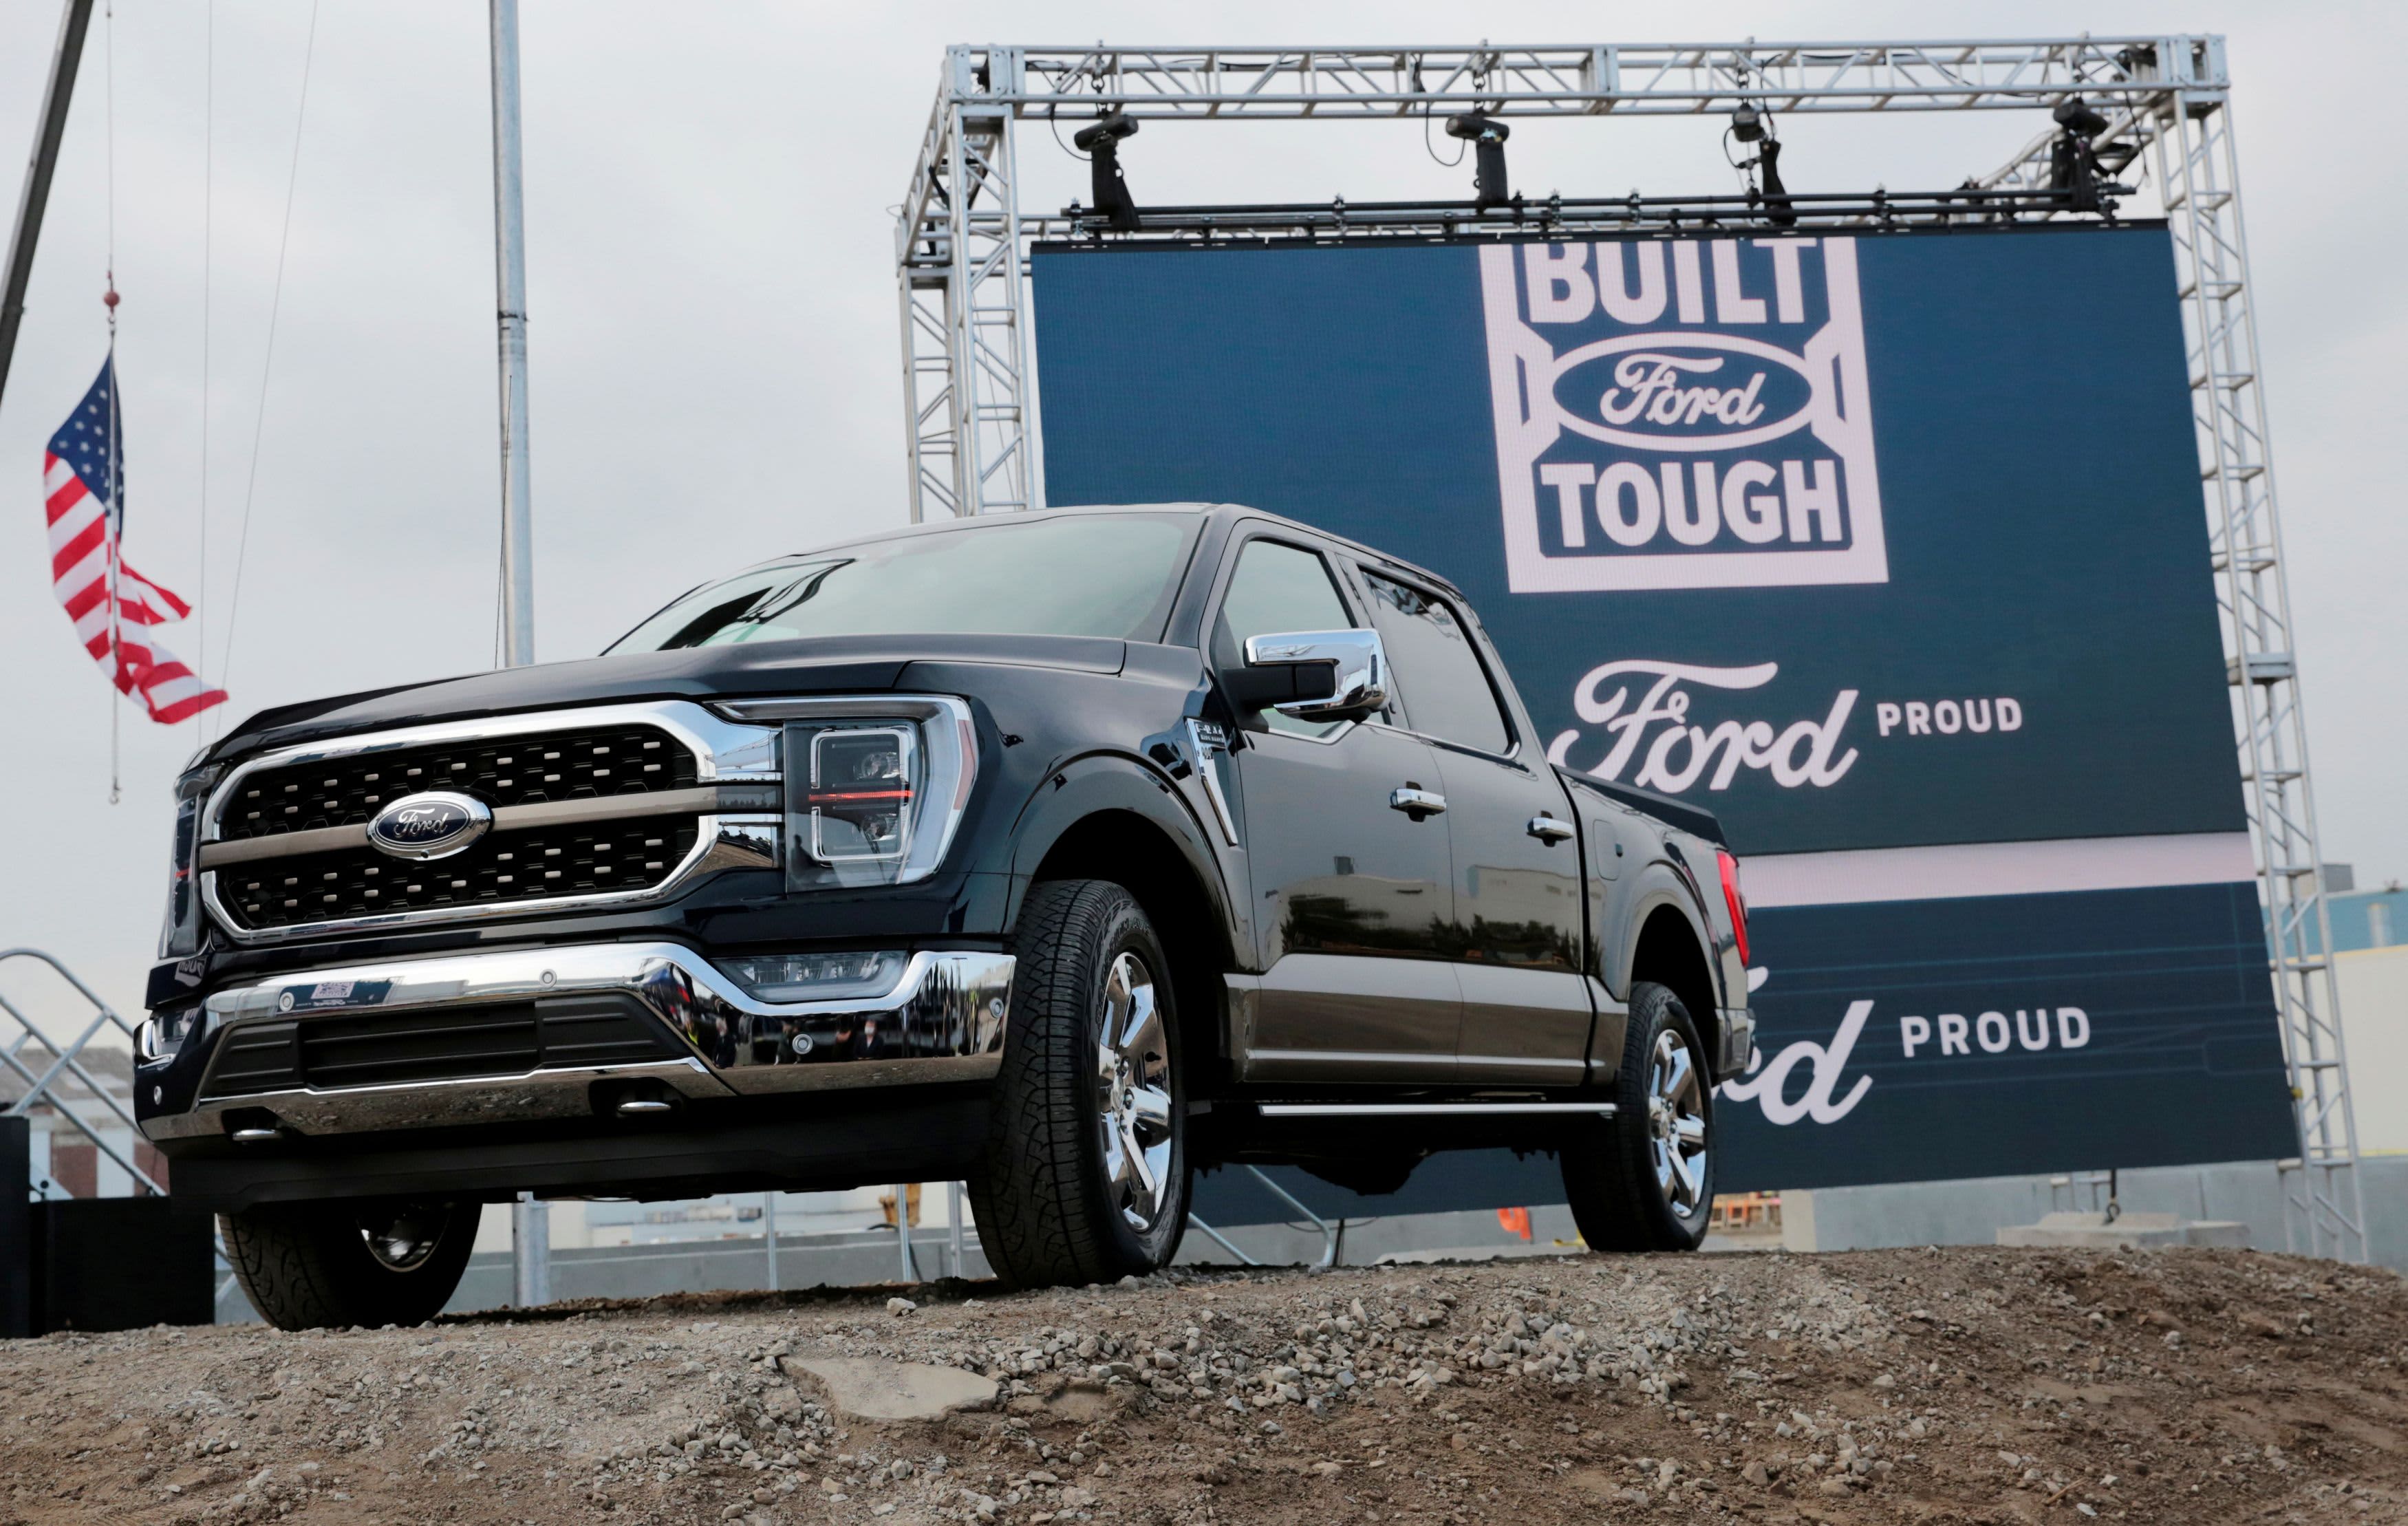 Ford cuts shifts, partially building F-150s due to chip shortages